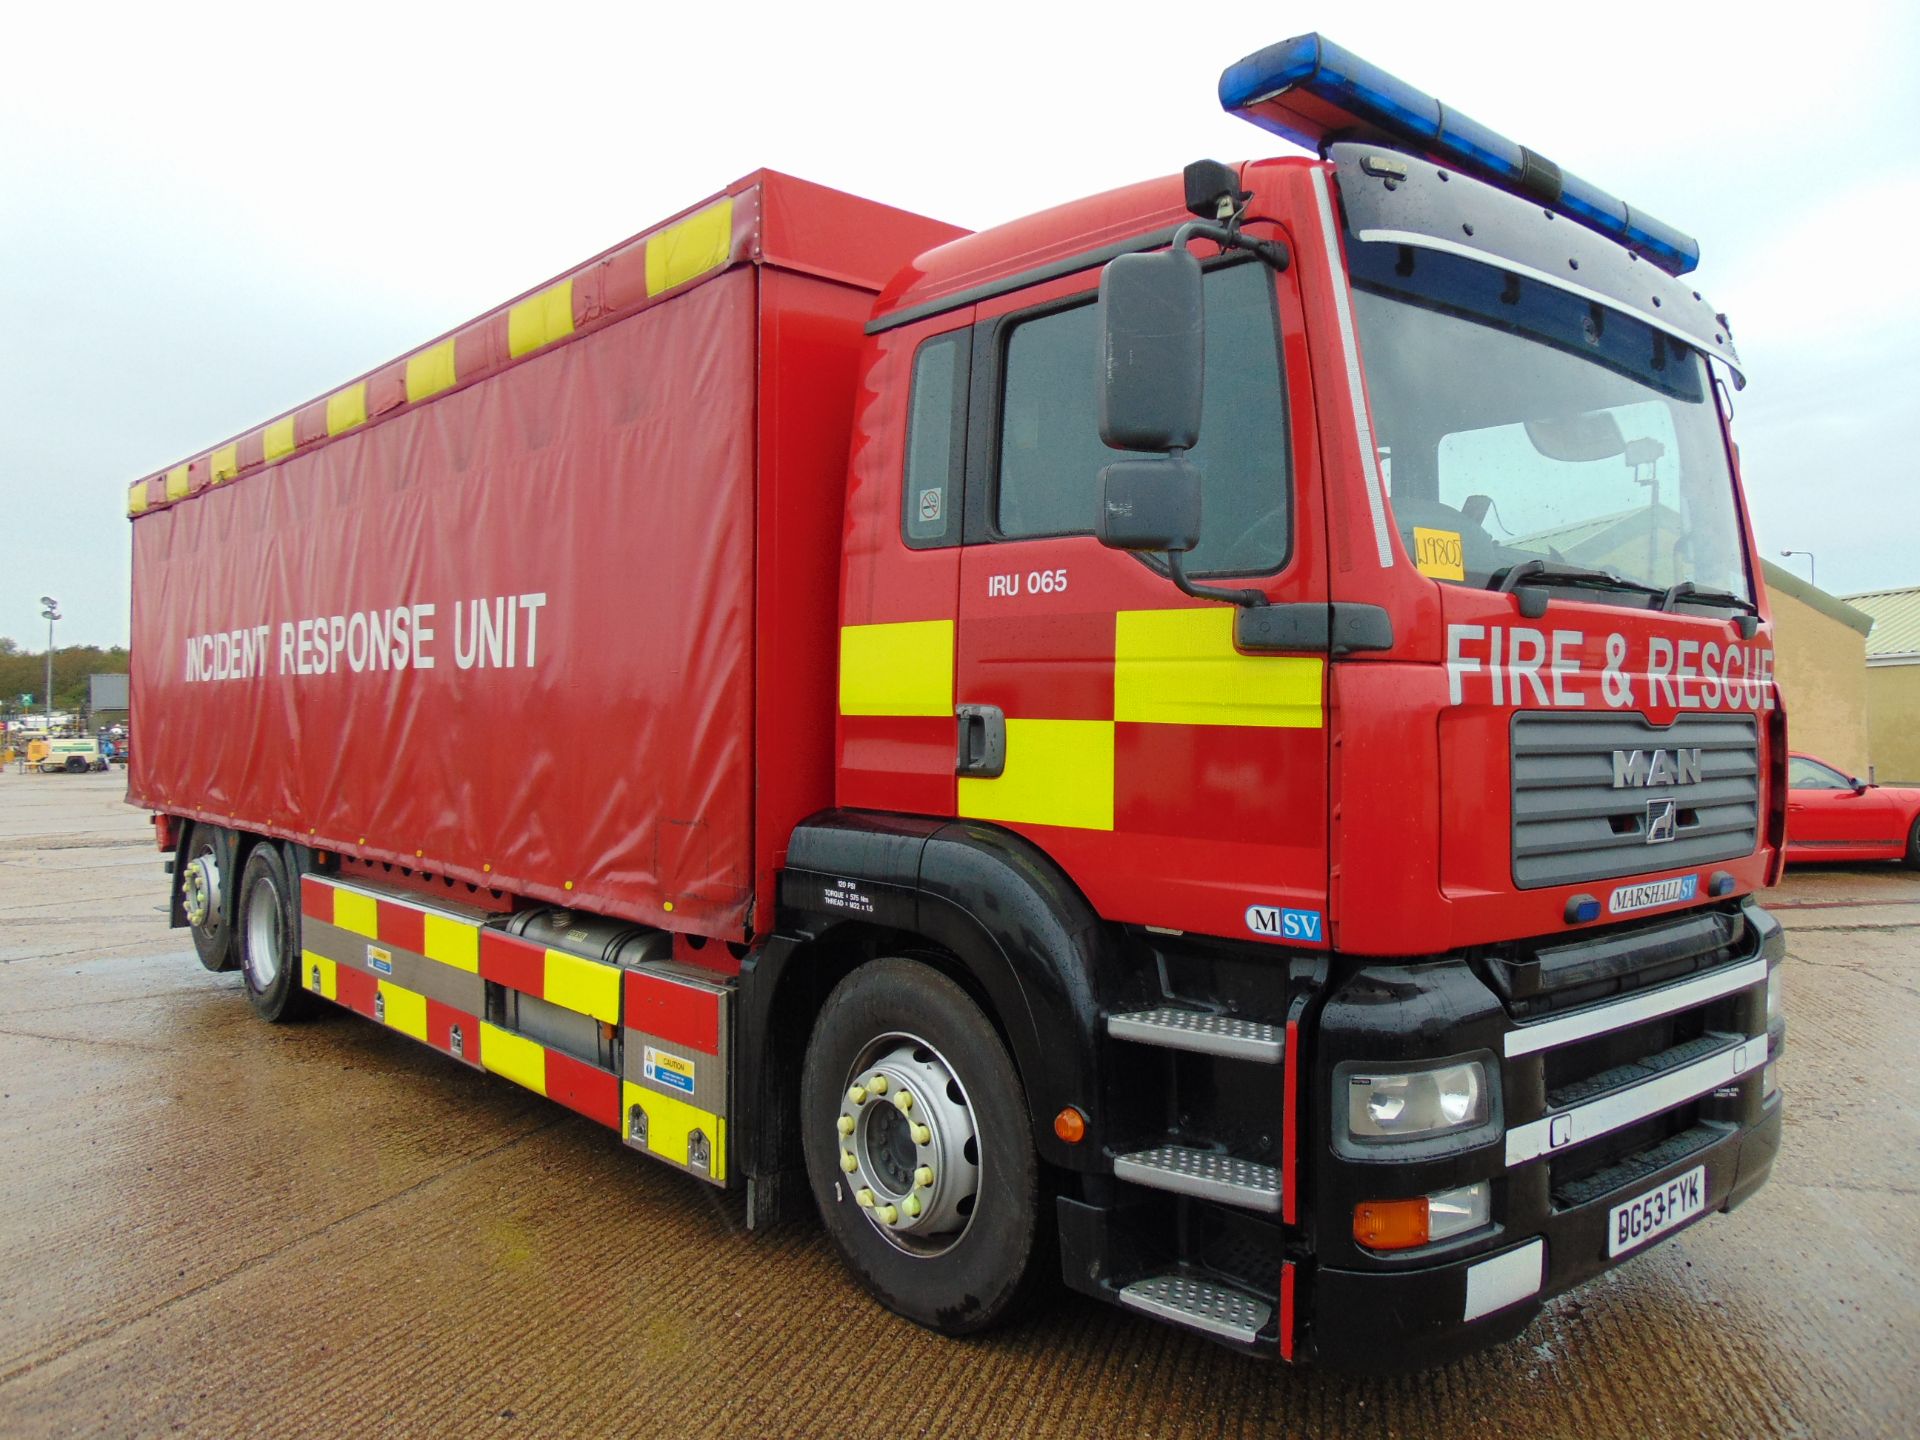 2004 MAN TG-A 6x2 Rear Steer Incident Support Unit